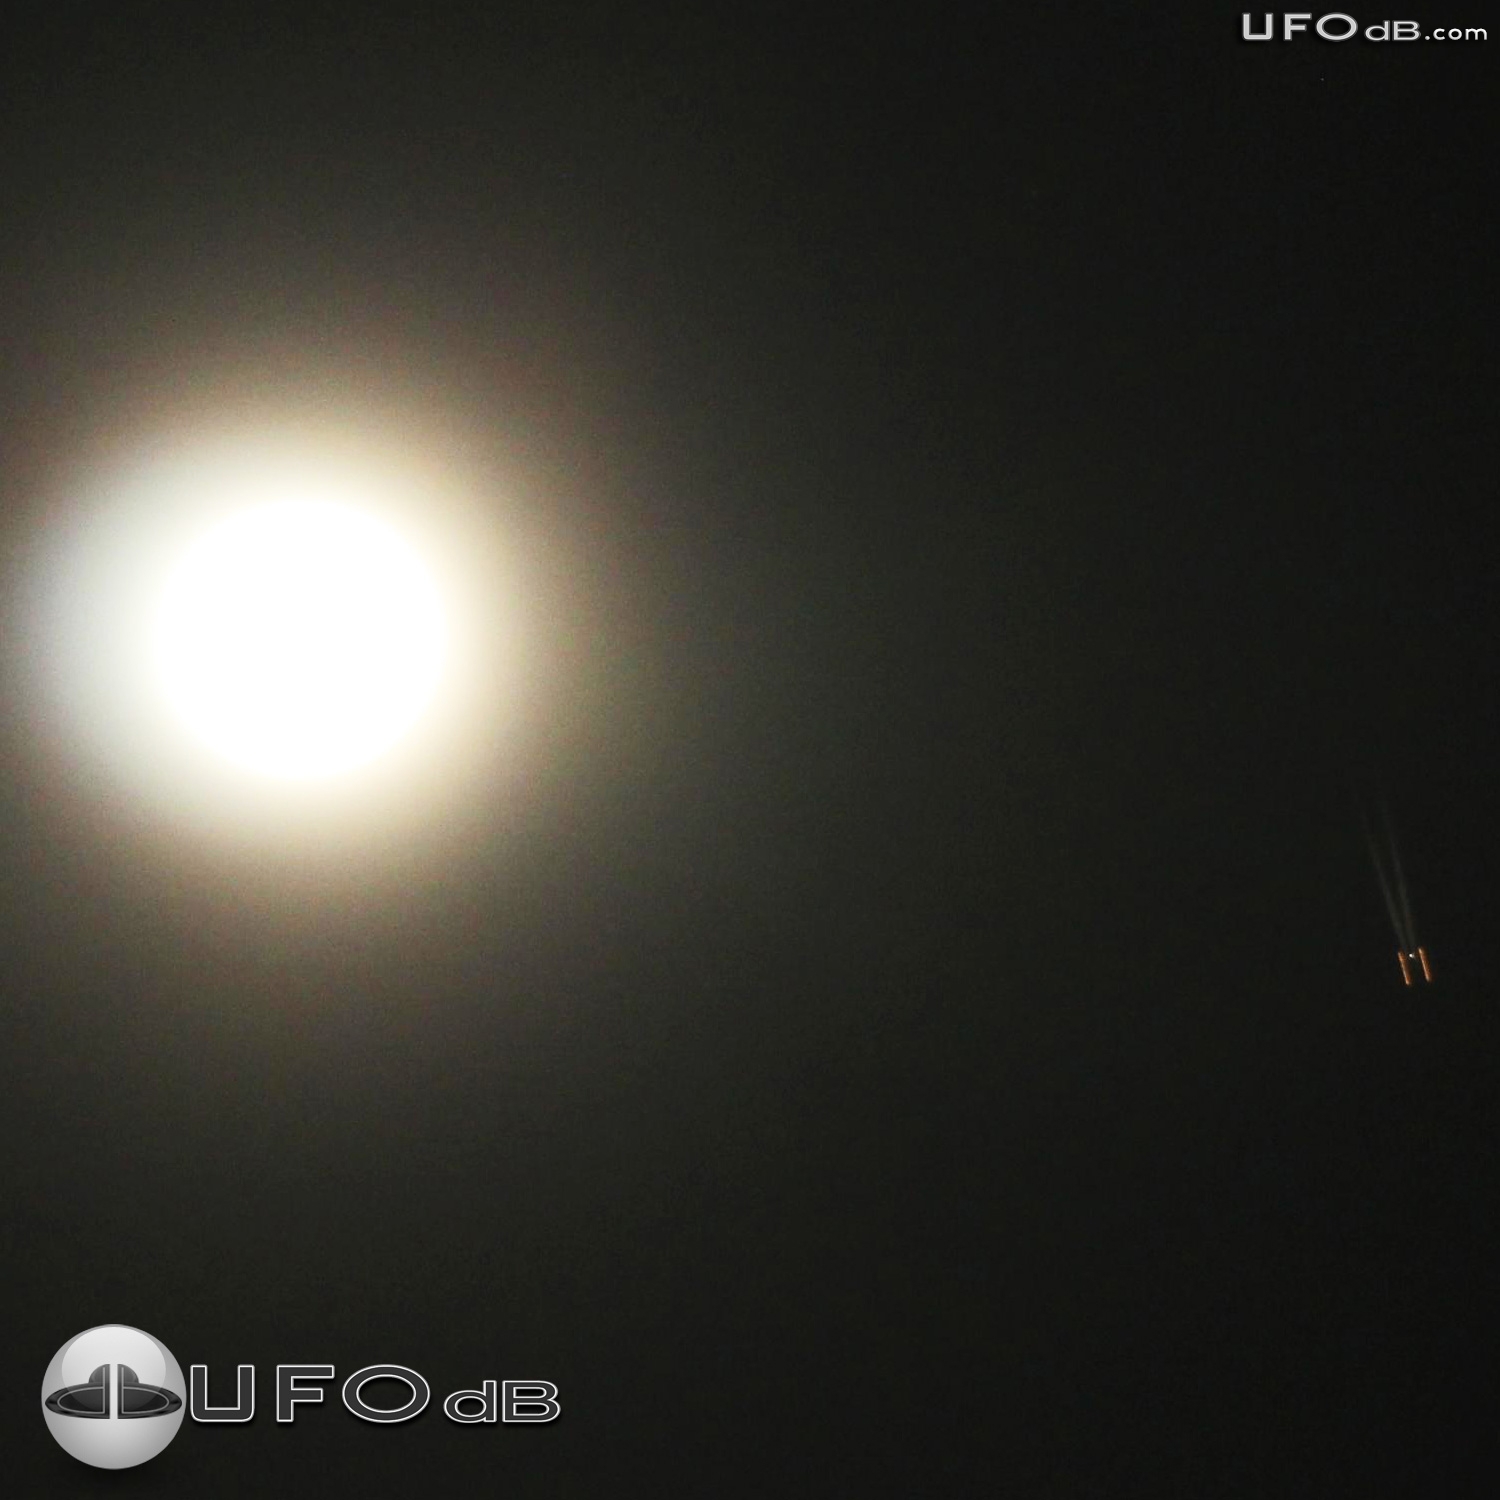 Moon picture captures a very strange shaped UFO | Louisiana USA 2011 UFO Picture #257-1